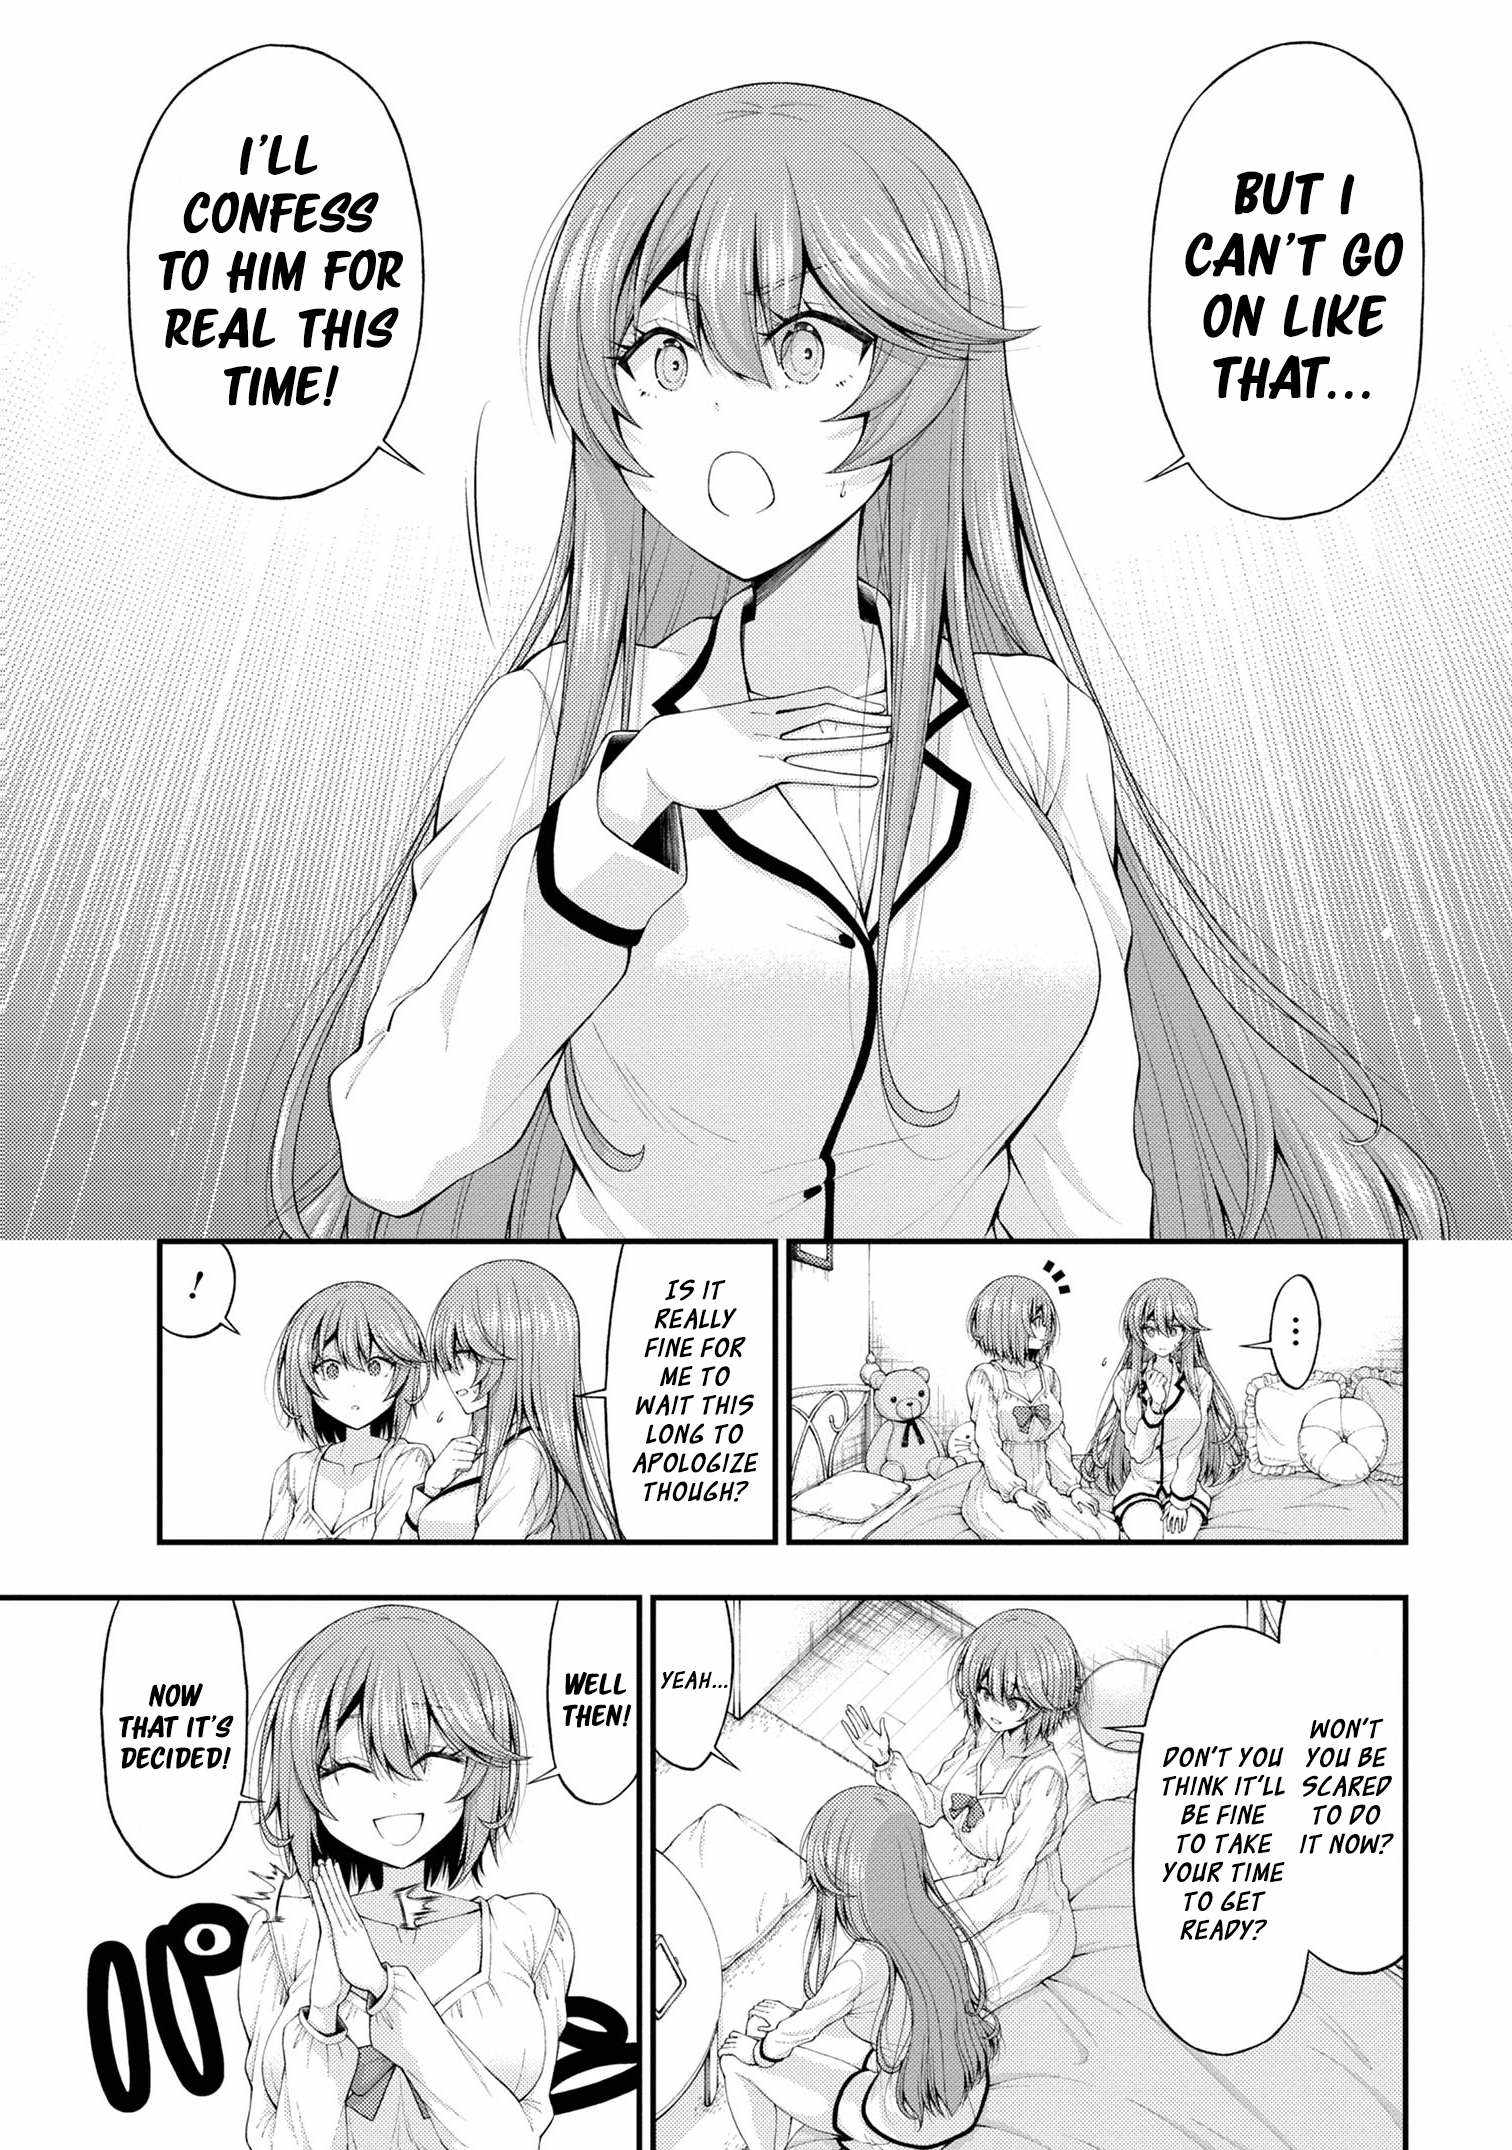 The Gal Who Was Meant to Confess to Me as a Game Punishment Has Apparently Fallen in Love with Me Chapter 12-5-eng-li - Page 22